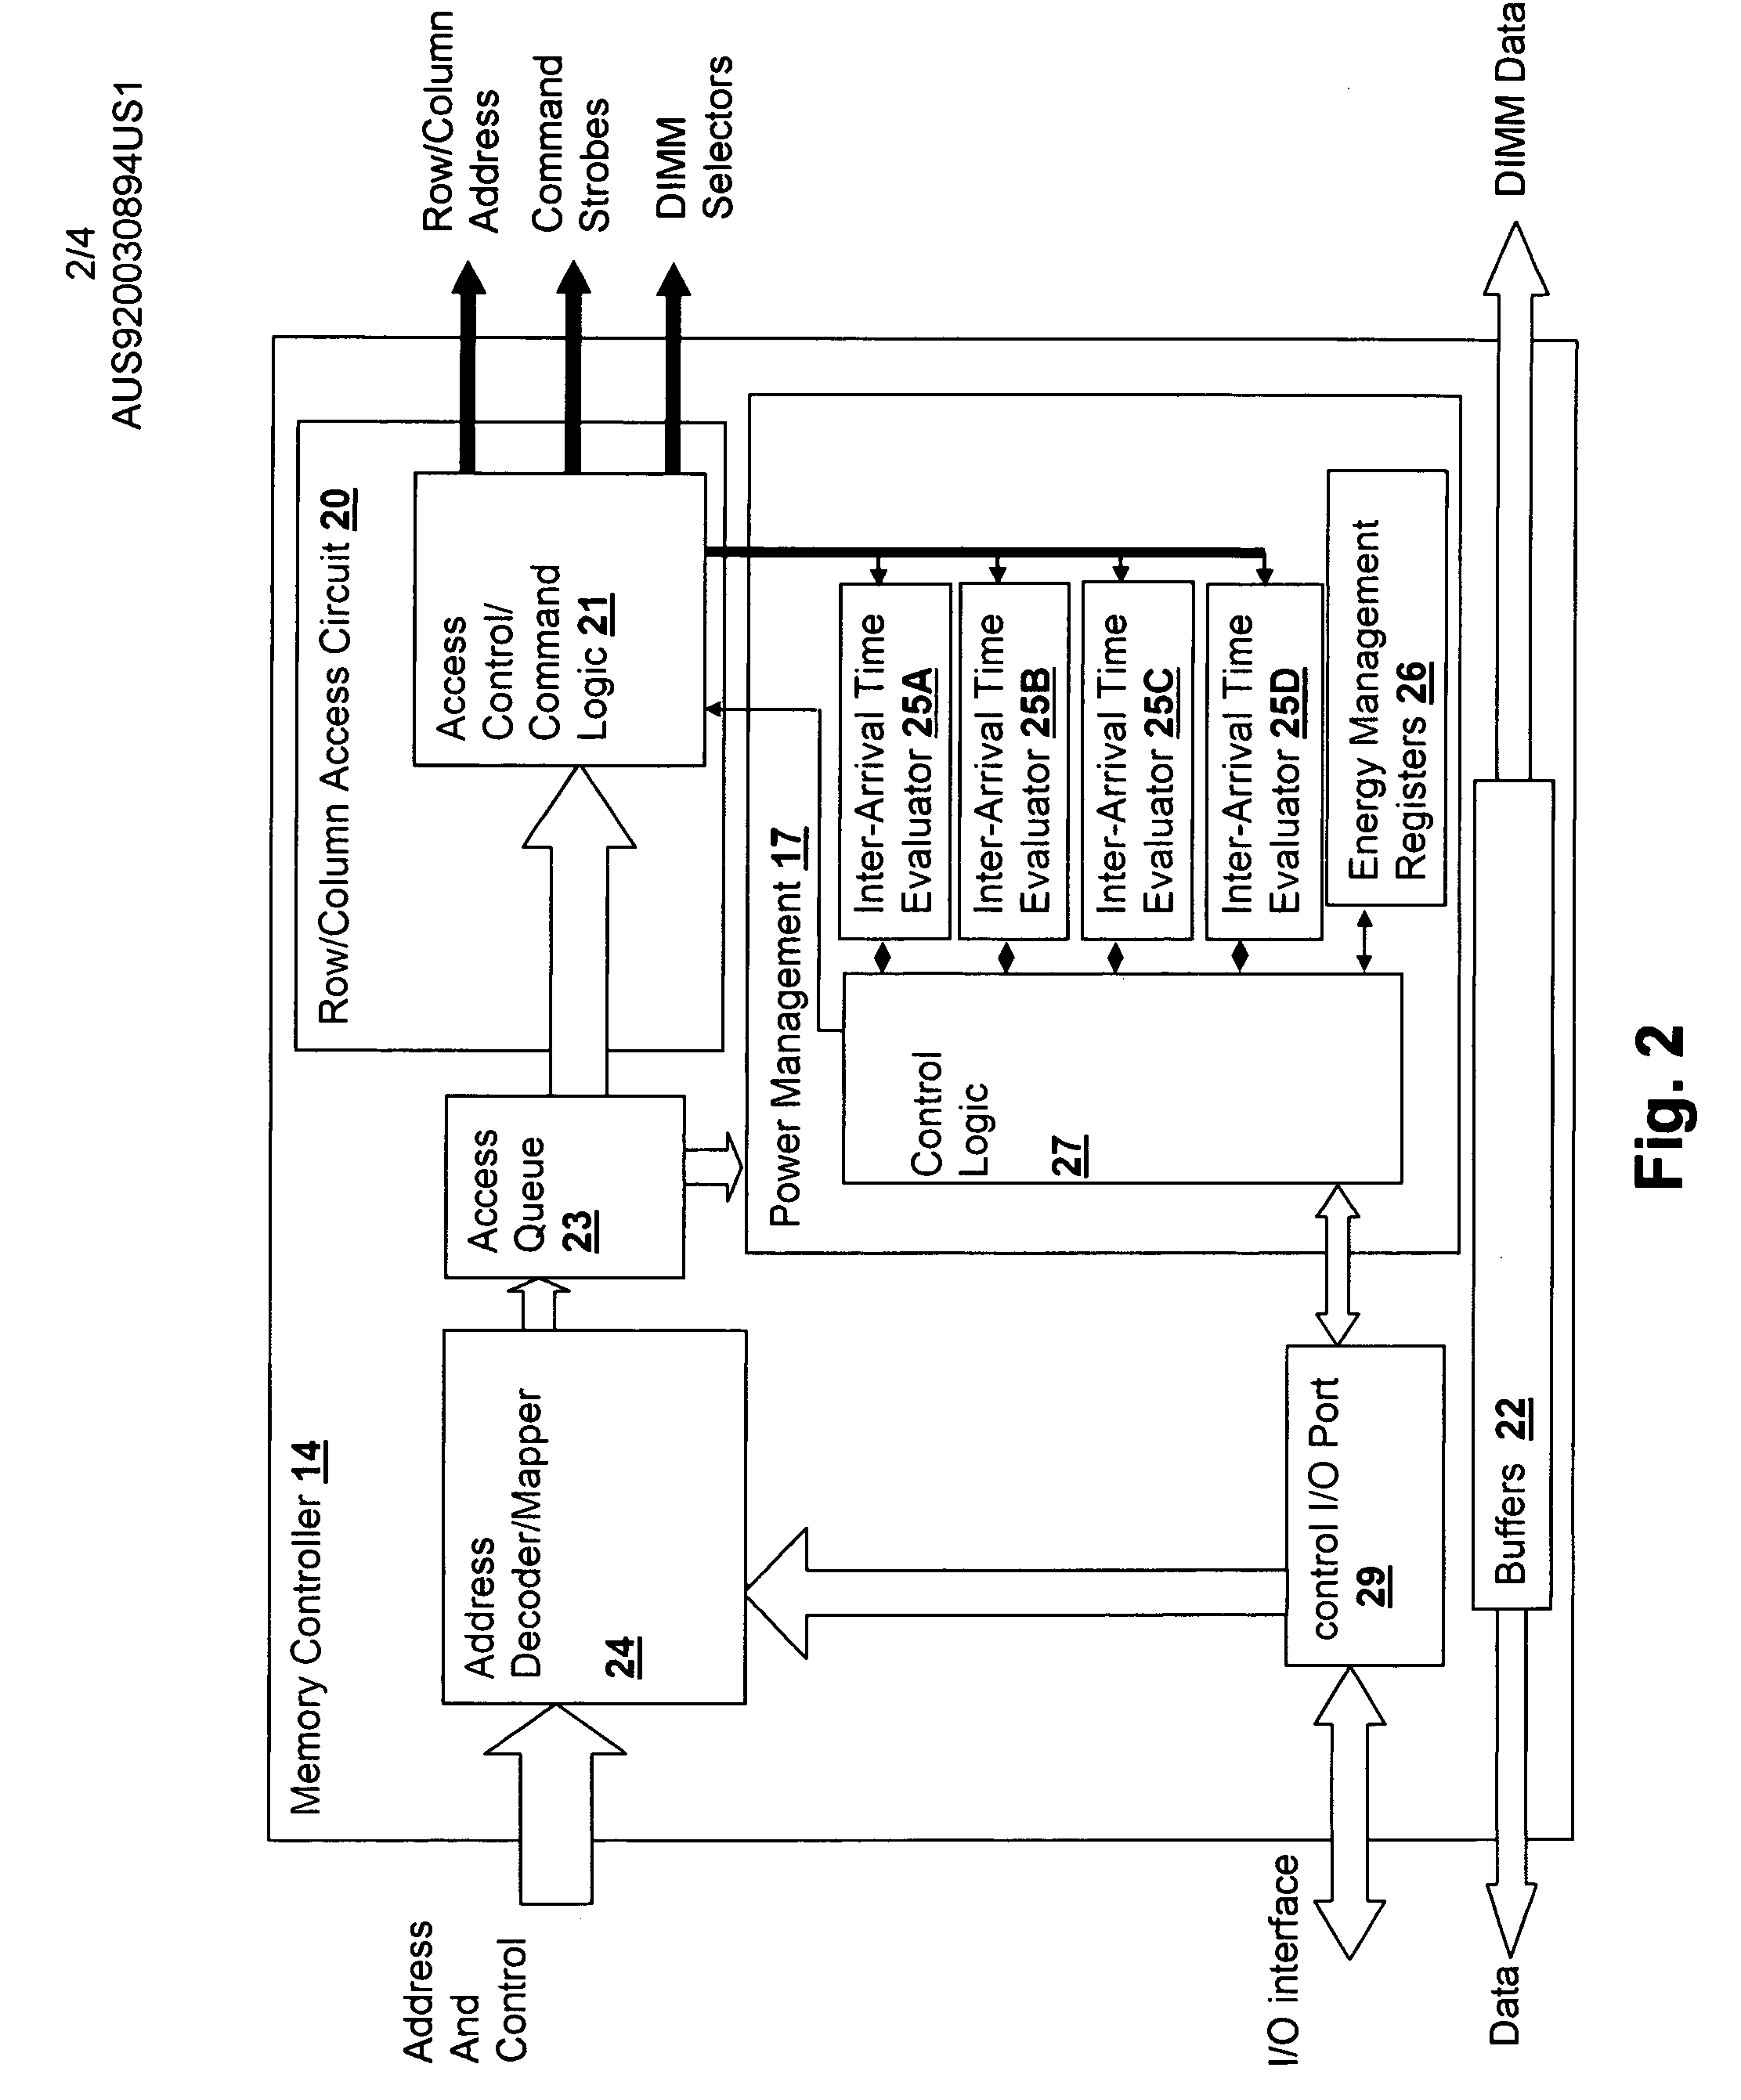 Method and system for power management including local bounding of device group power consumption